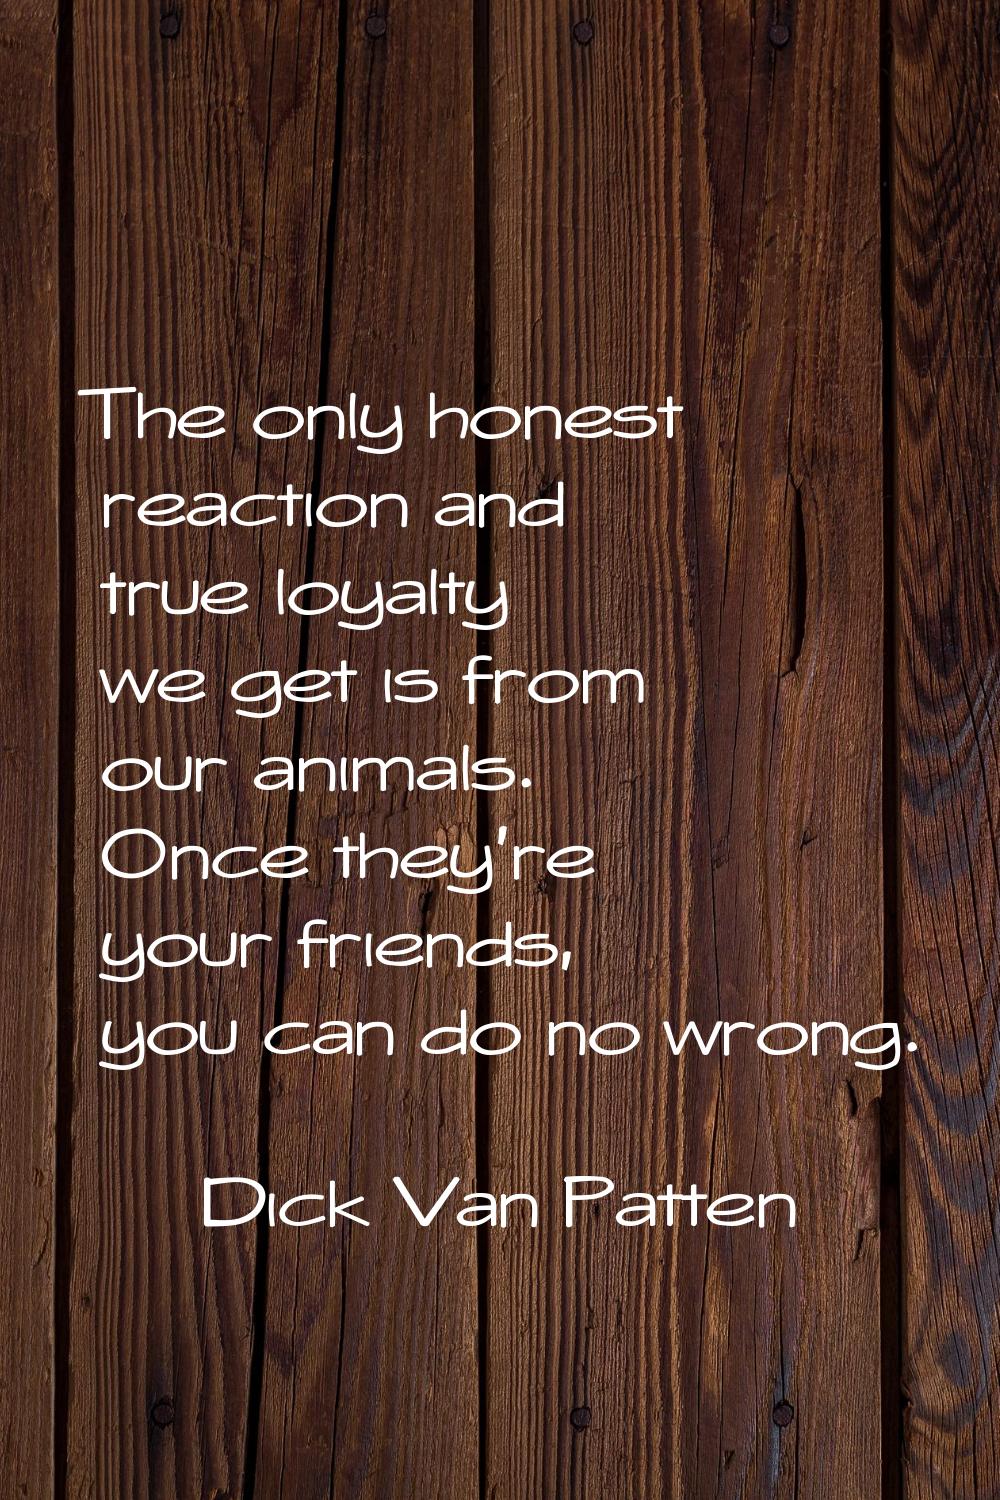 The only honest reaction and true loyalty we get is from our animals. Once they're your friends, yo